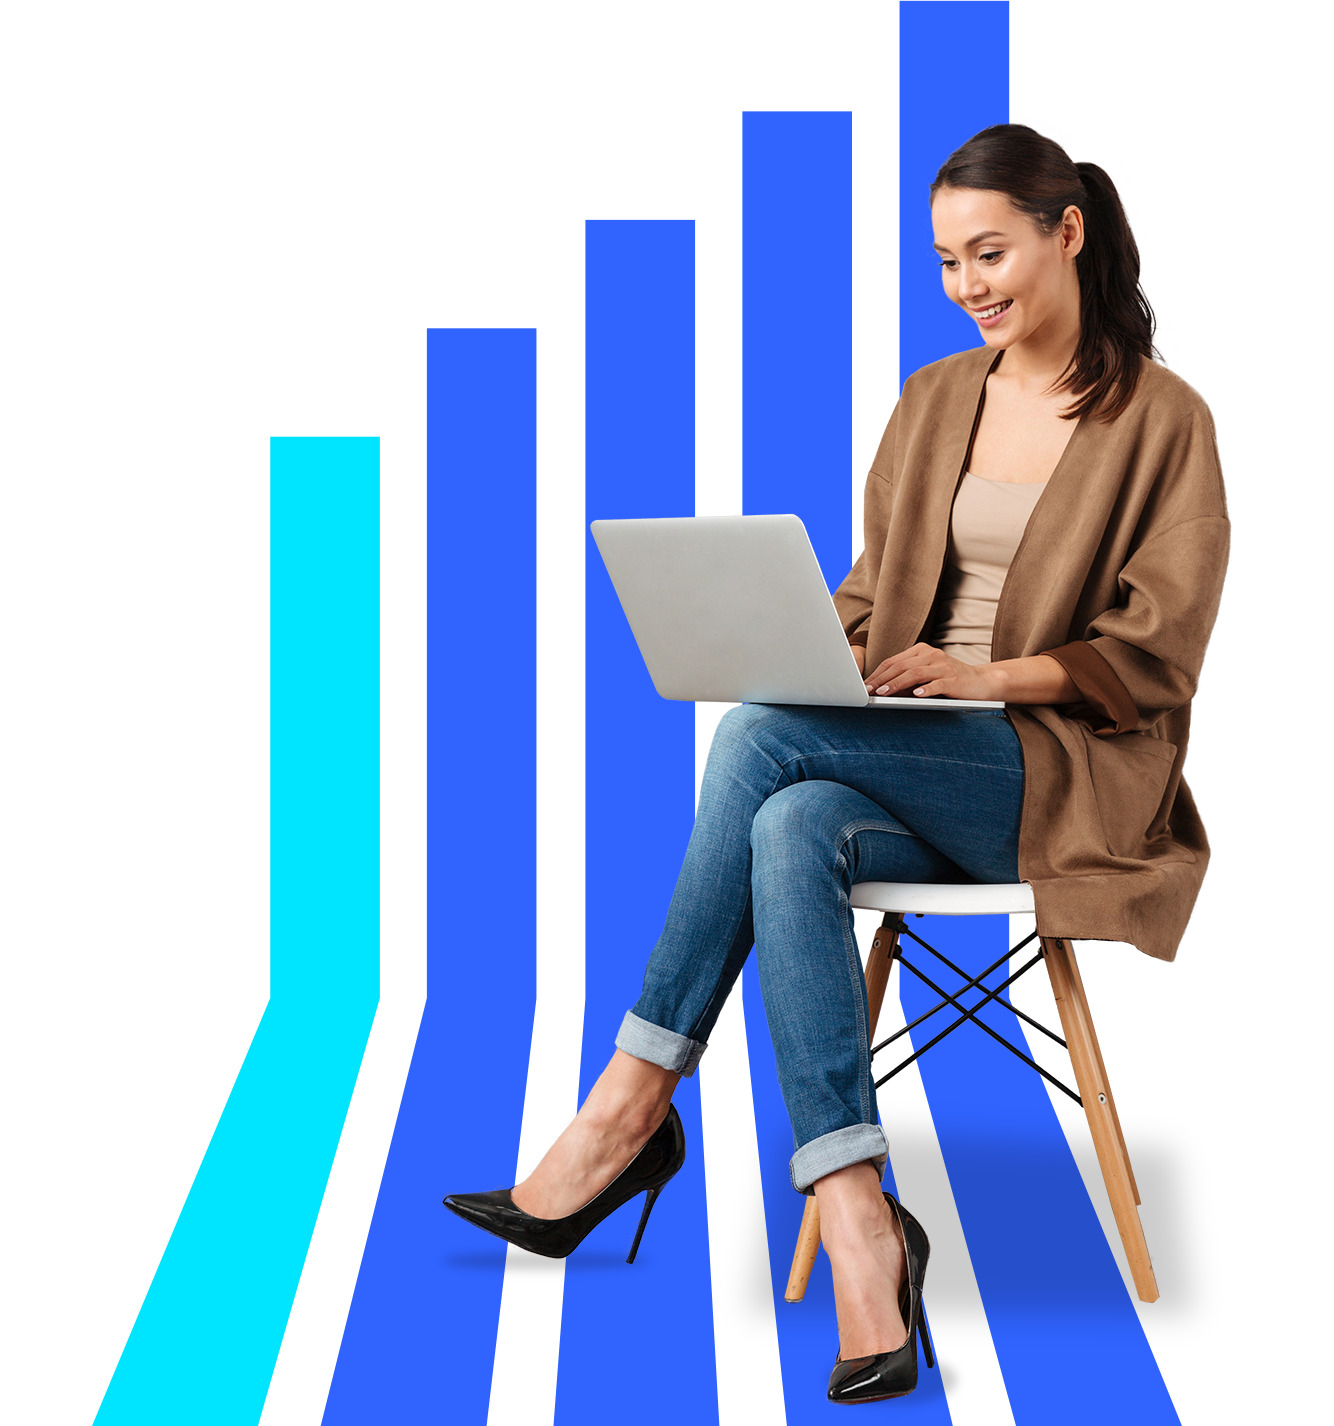 Woman sitting in a chair typing on a laptop with a blue bar graph design in the background